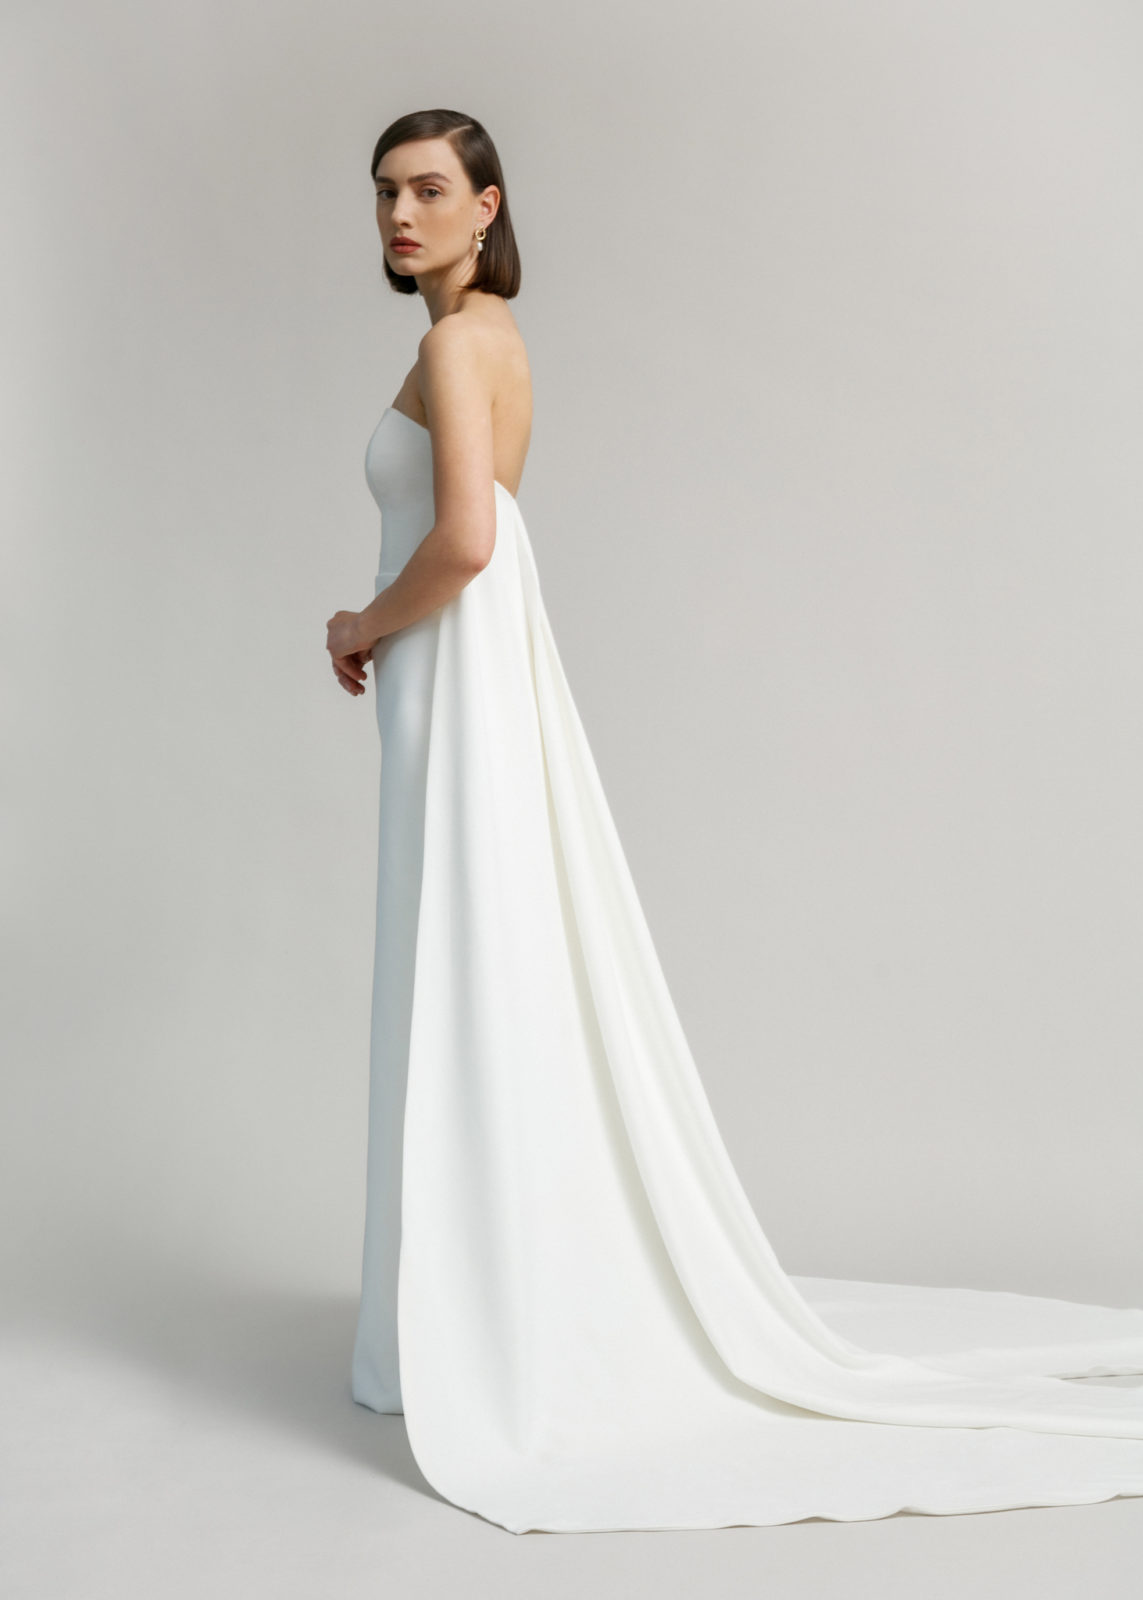 Chic and modern wedding gown by Canadian designer Aesling